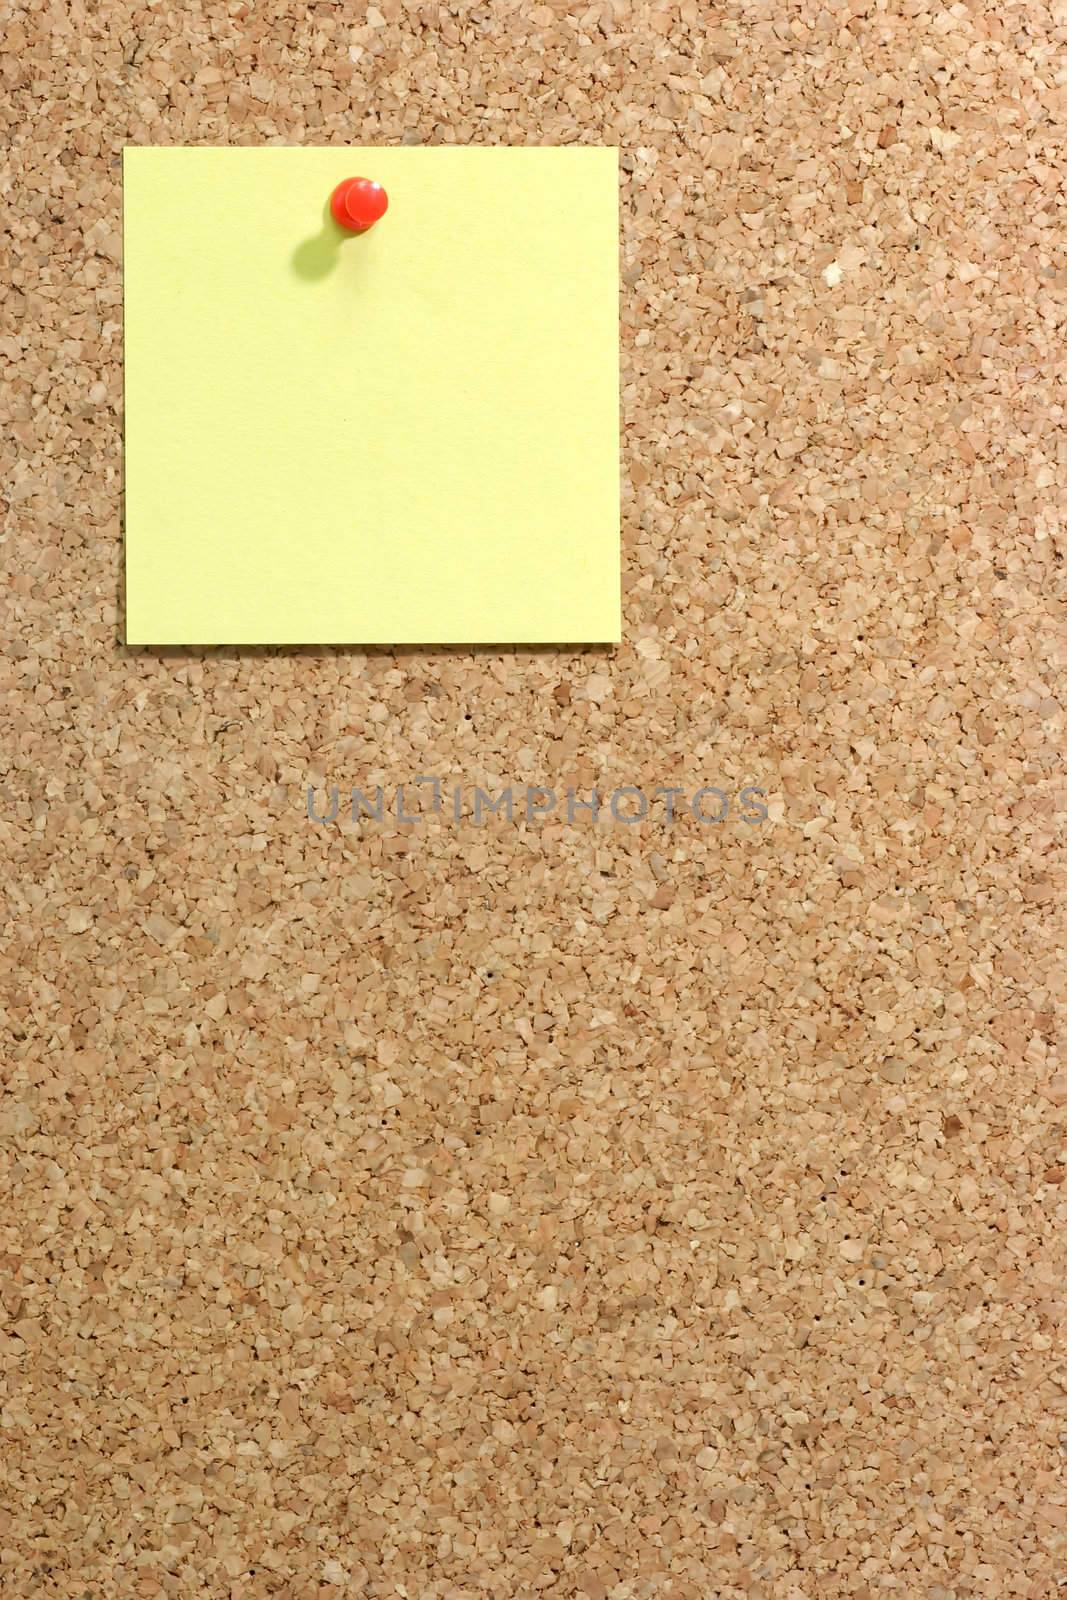  Colorful blank post it note affixed to the corkboard.
